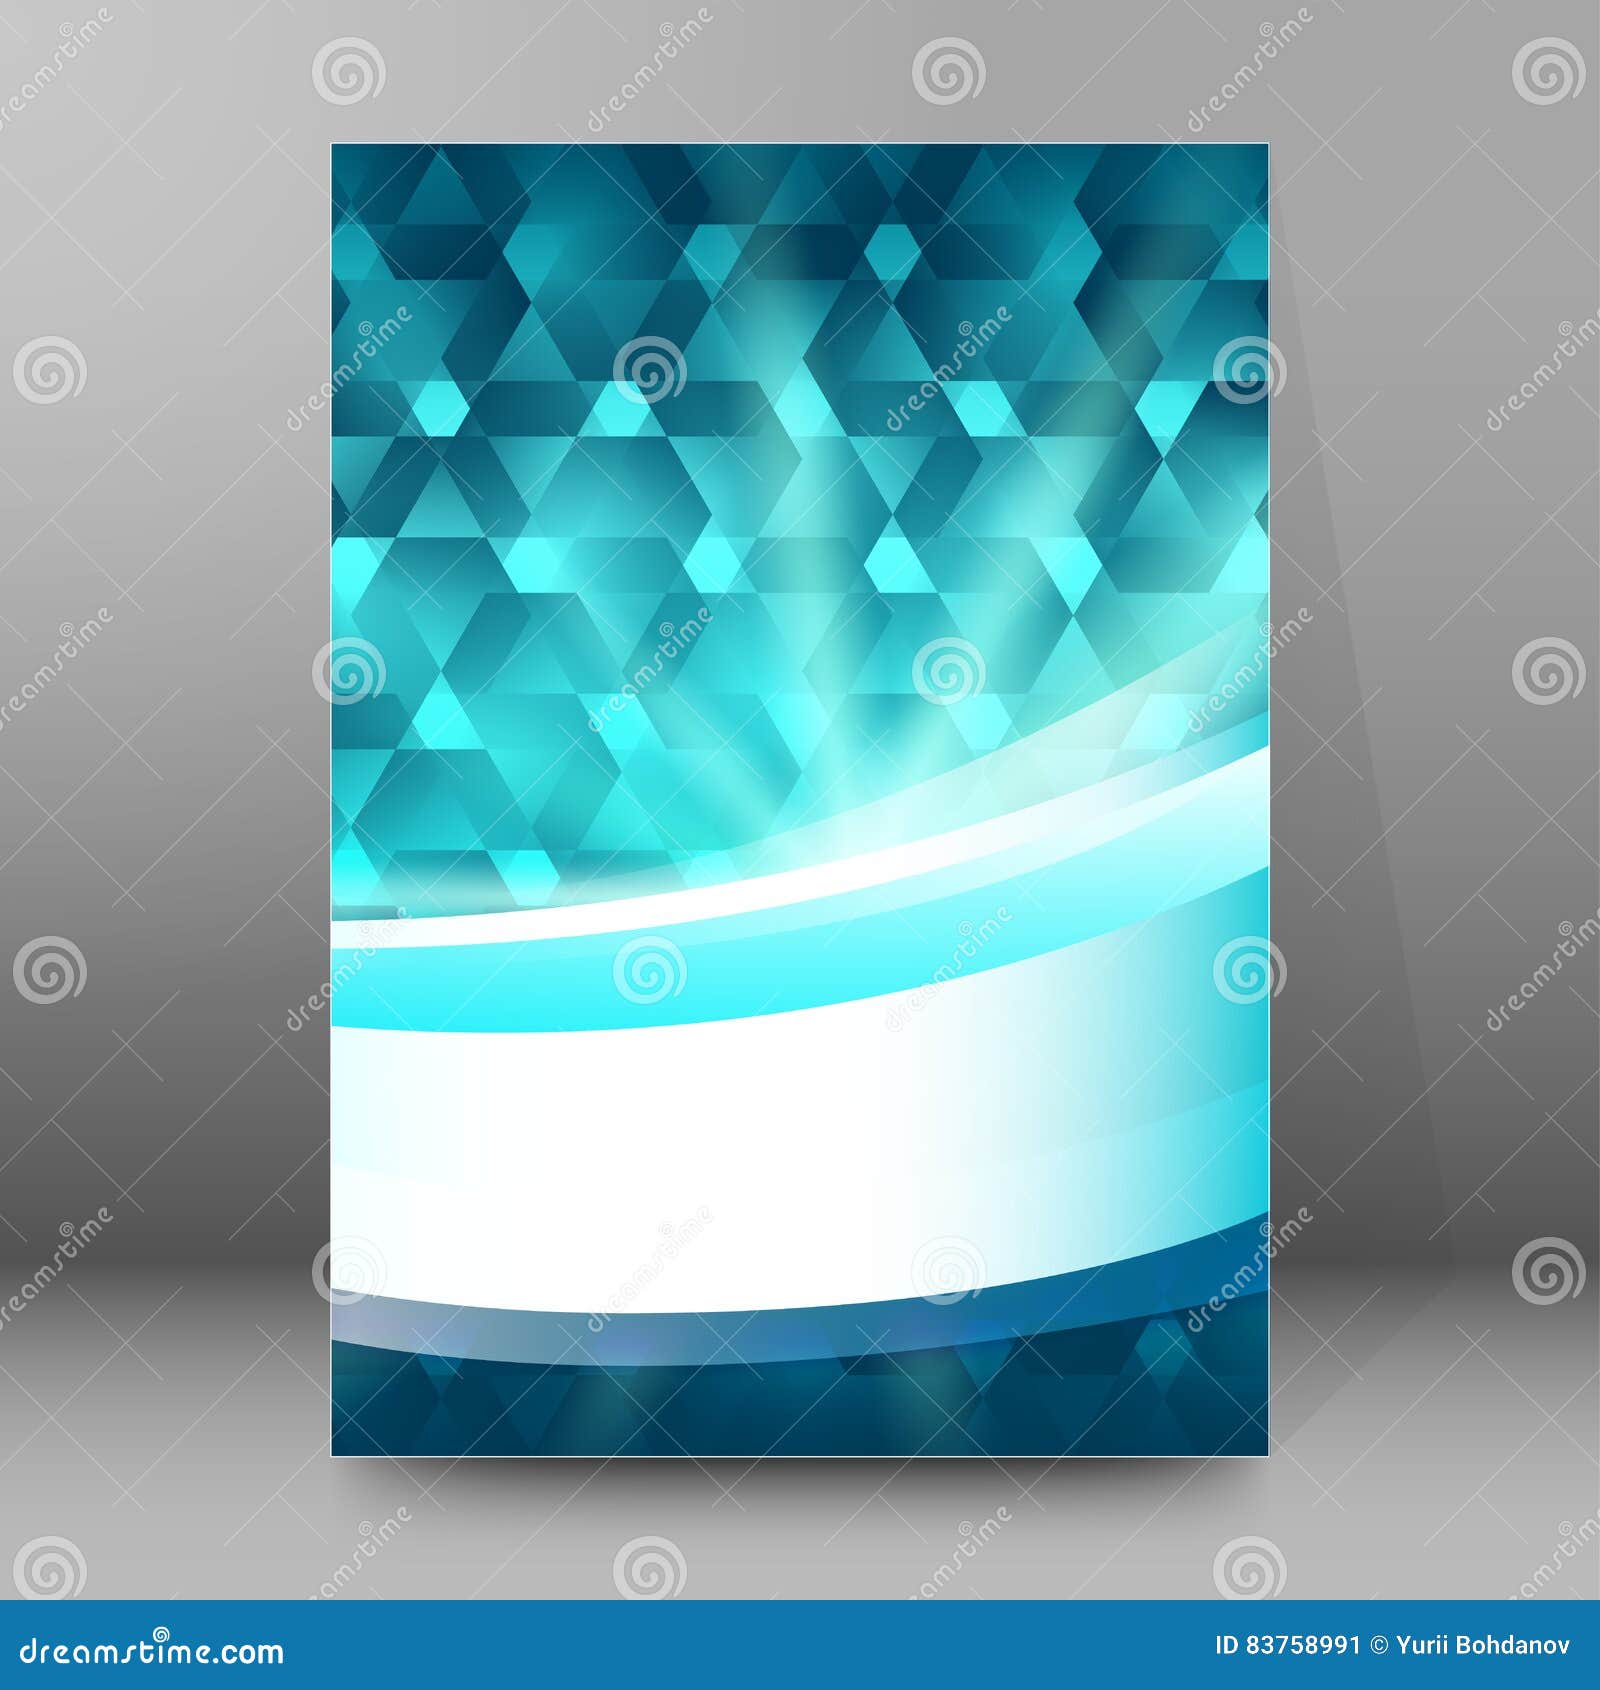 Background Report Brochure Cover Pages A4 Style Abstract Glow53 Stock Vector Illustration Of Journal Graphic 83758991